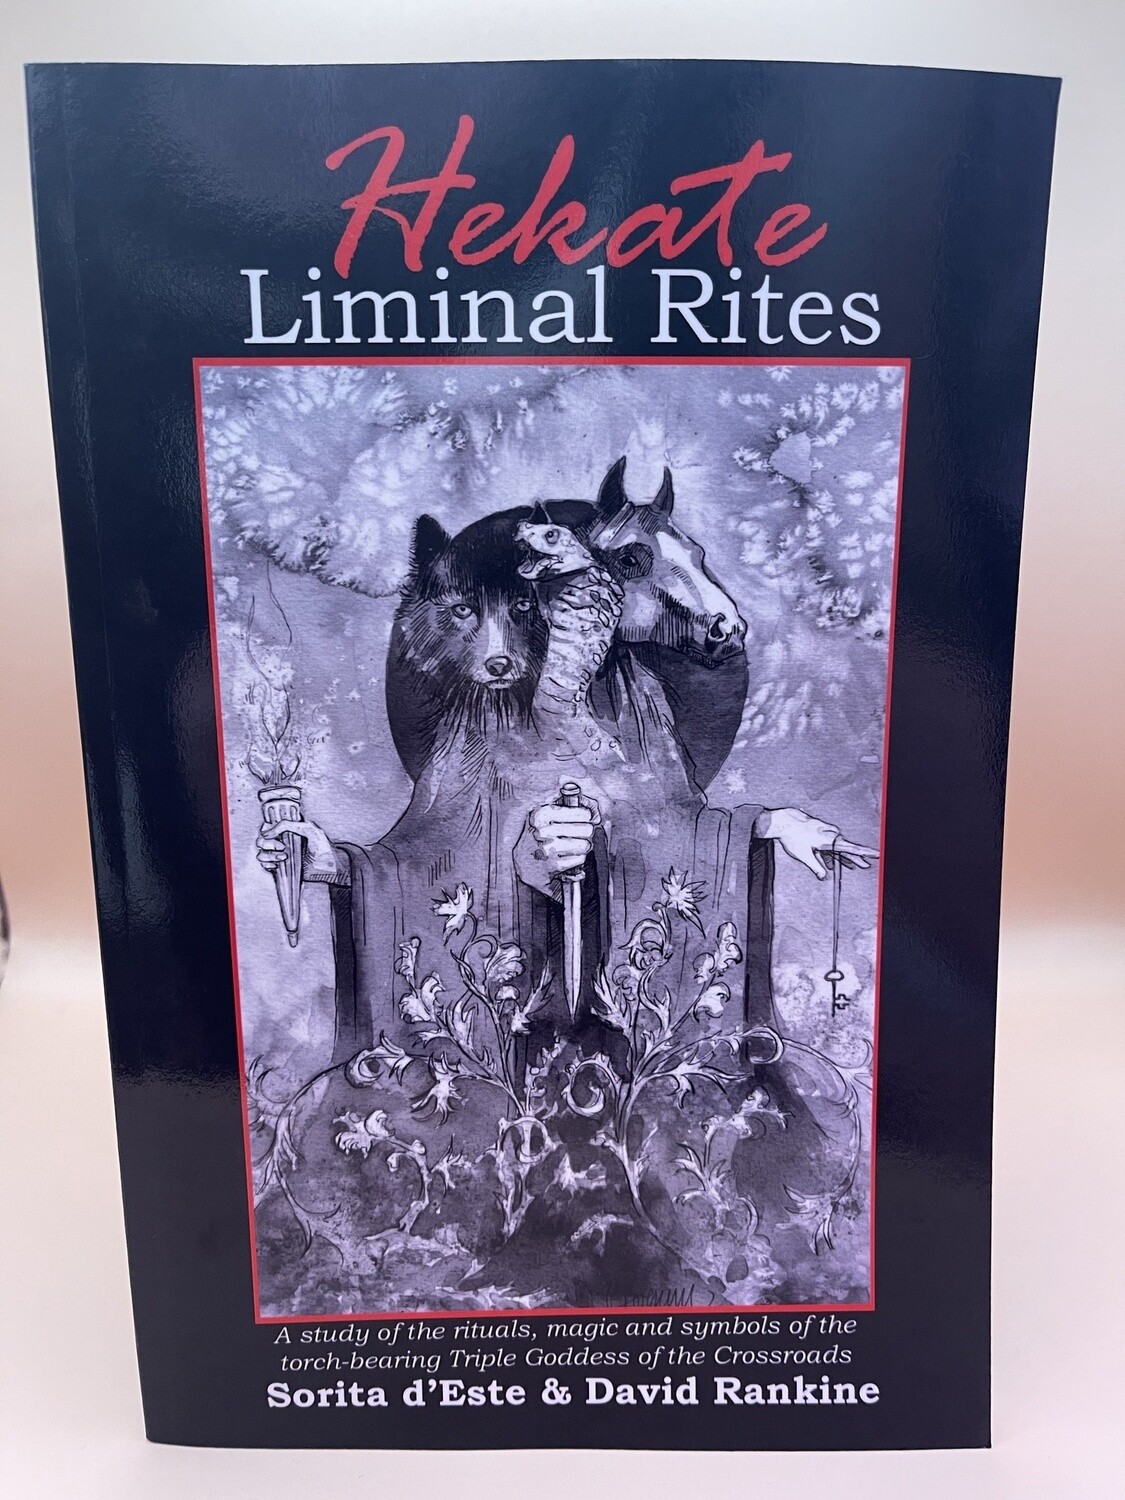 Hekate Liminal Rites: A Study of the Rituals, Magic and Symbols of the torch-bearing Triple Goddess of the Crossroads